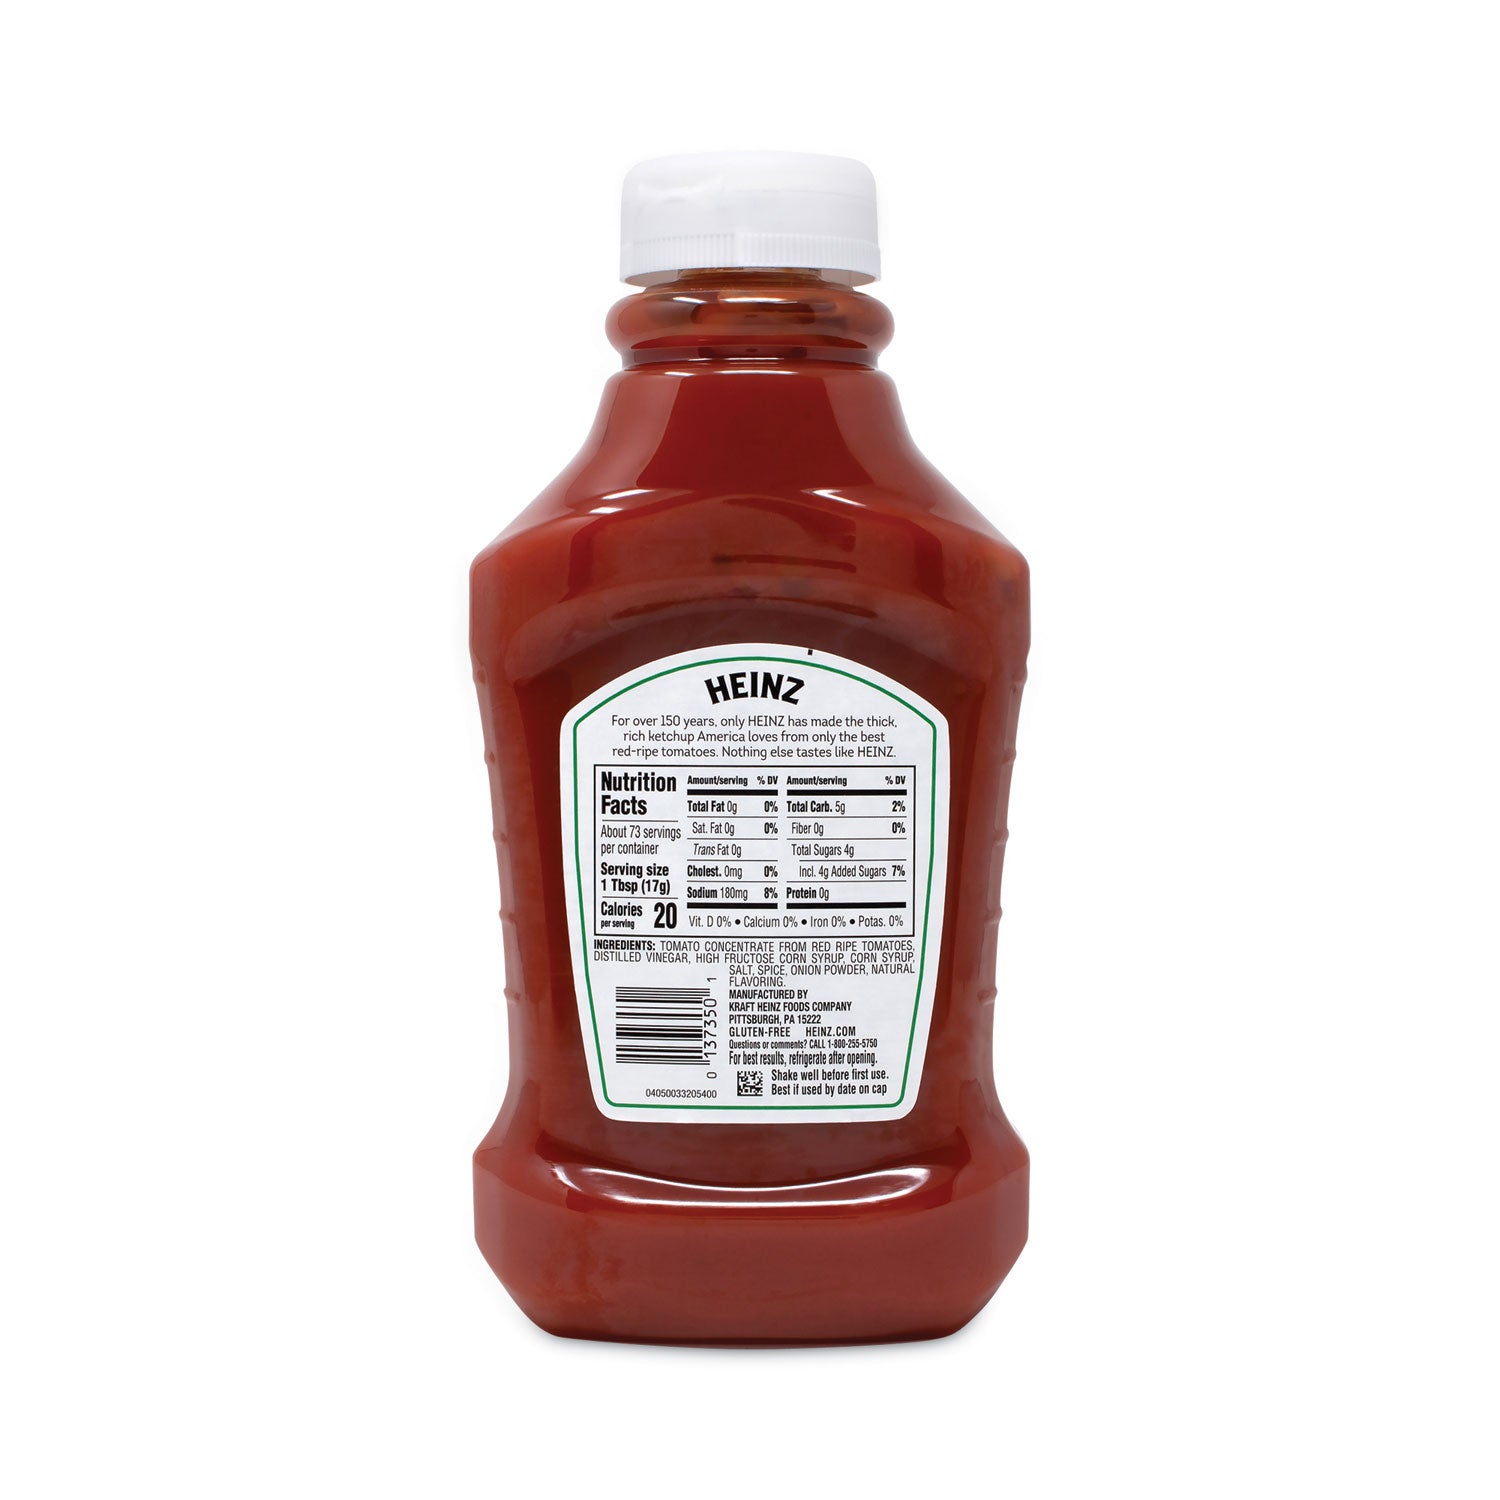 tomato-ketchup-squeeze-bottle-44-oz-bottle-3-pack-ships-in-1-3-business-days_grr22000499 - 3